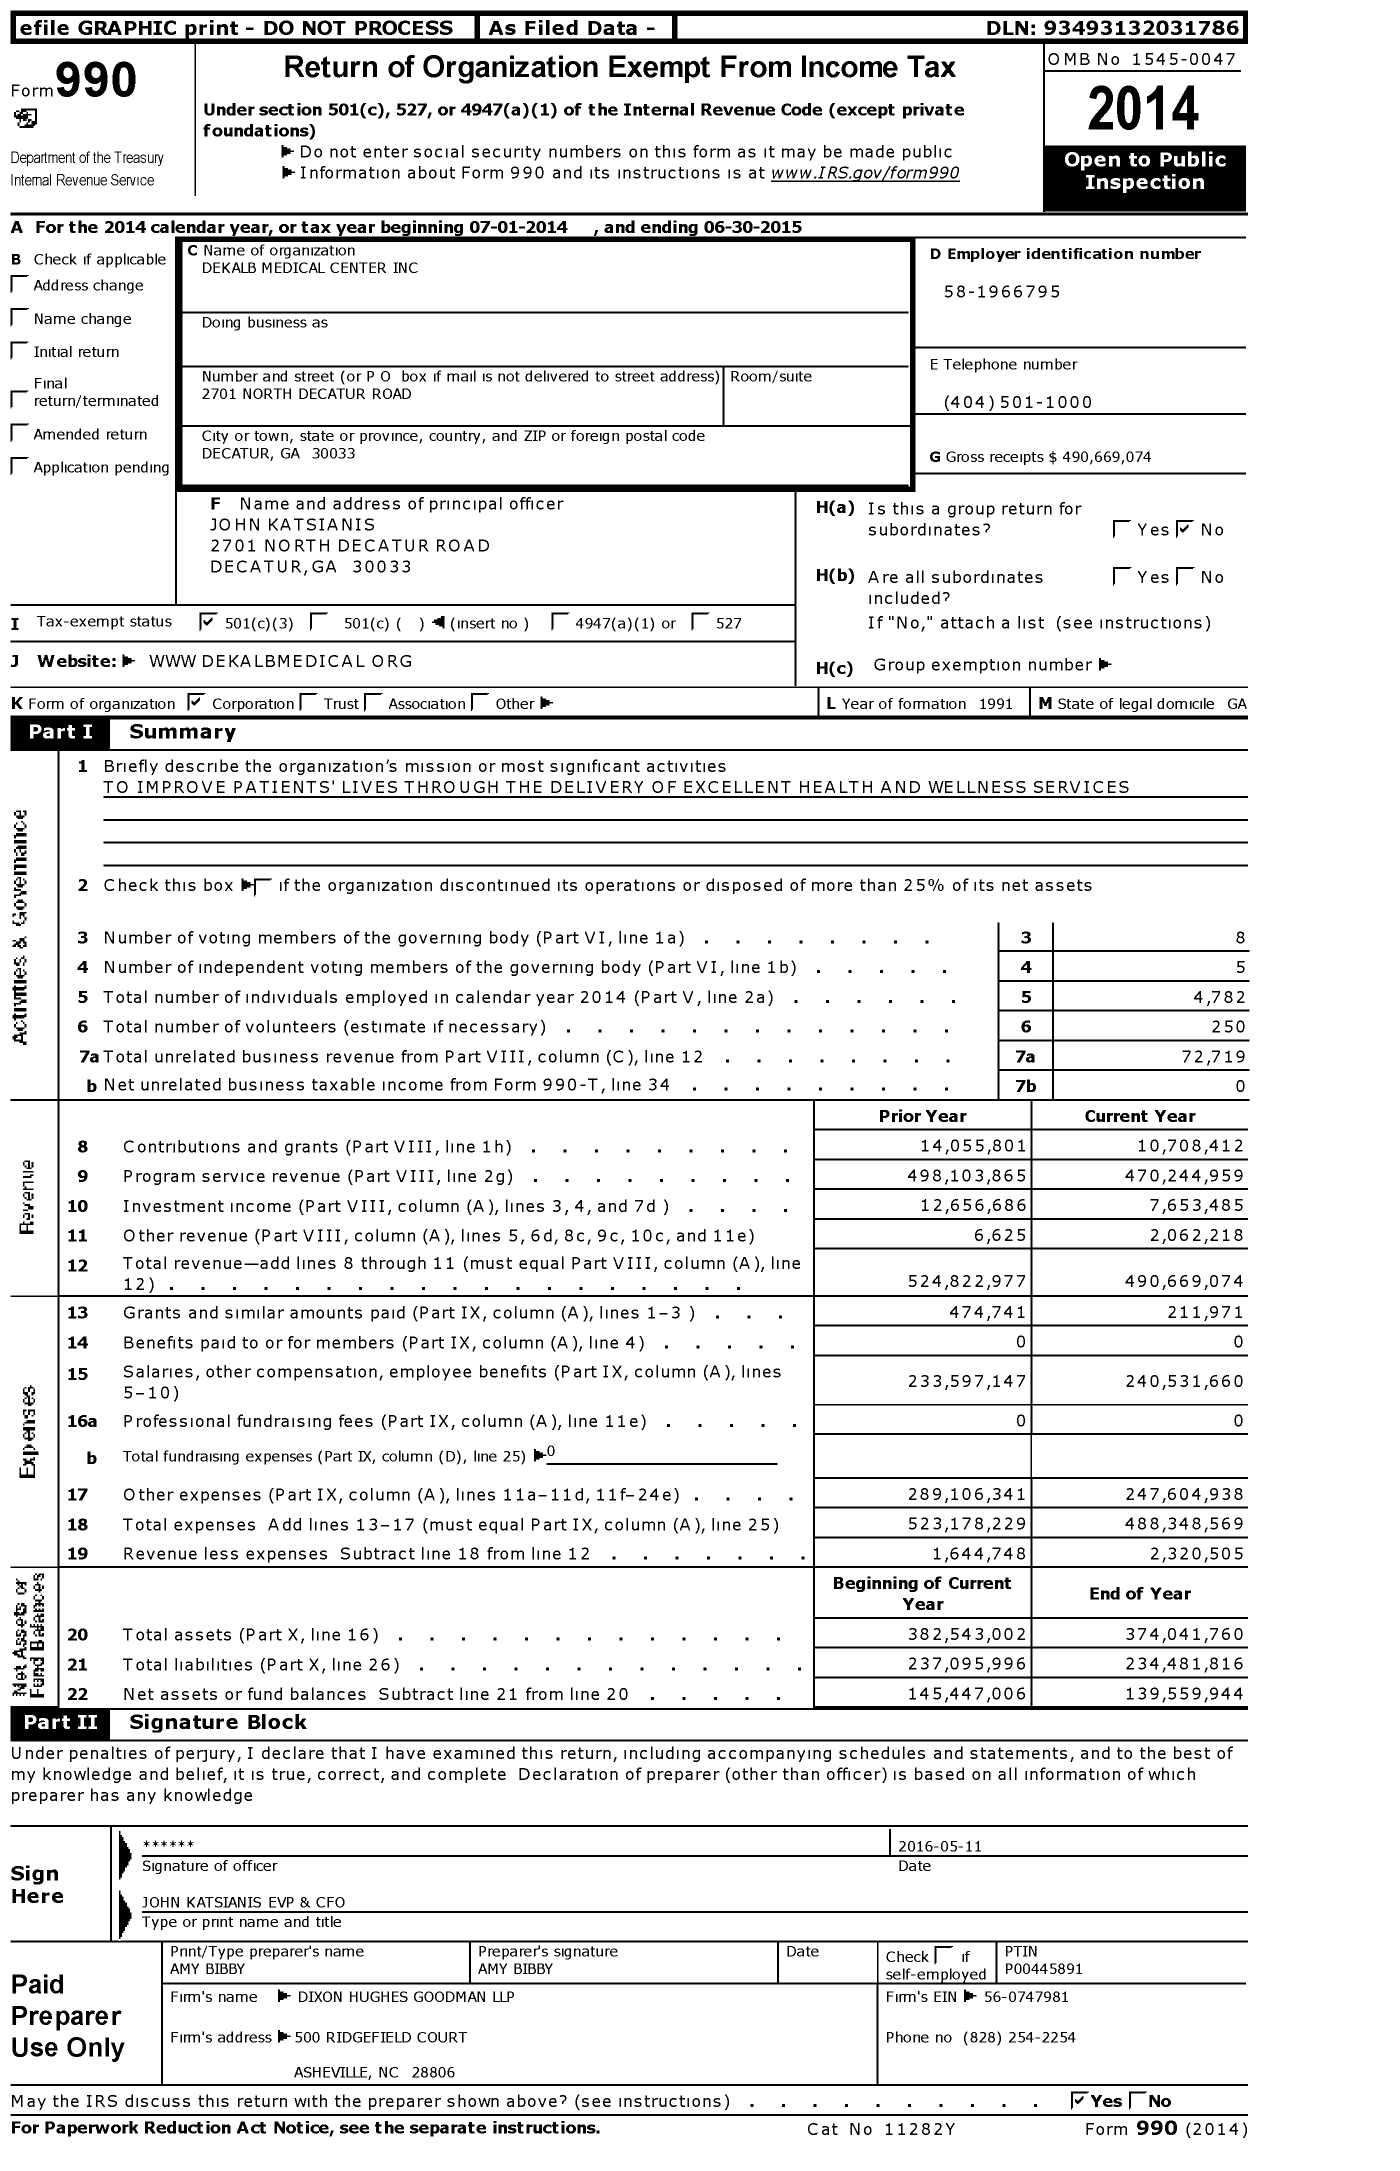 Image of first page of 2014 Form 990 for Dekalb Medical Center